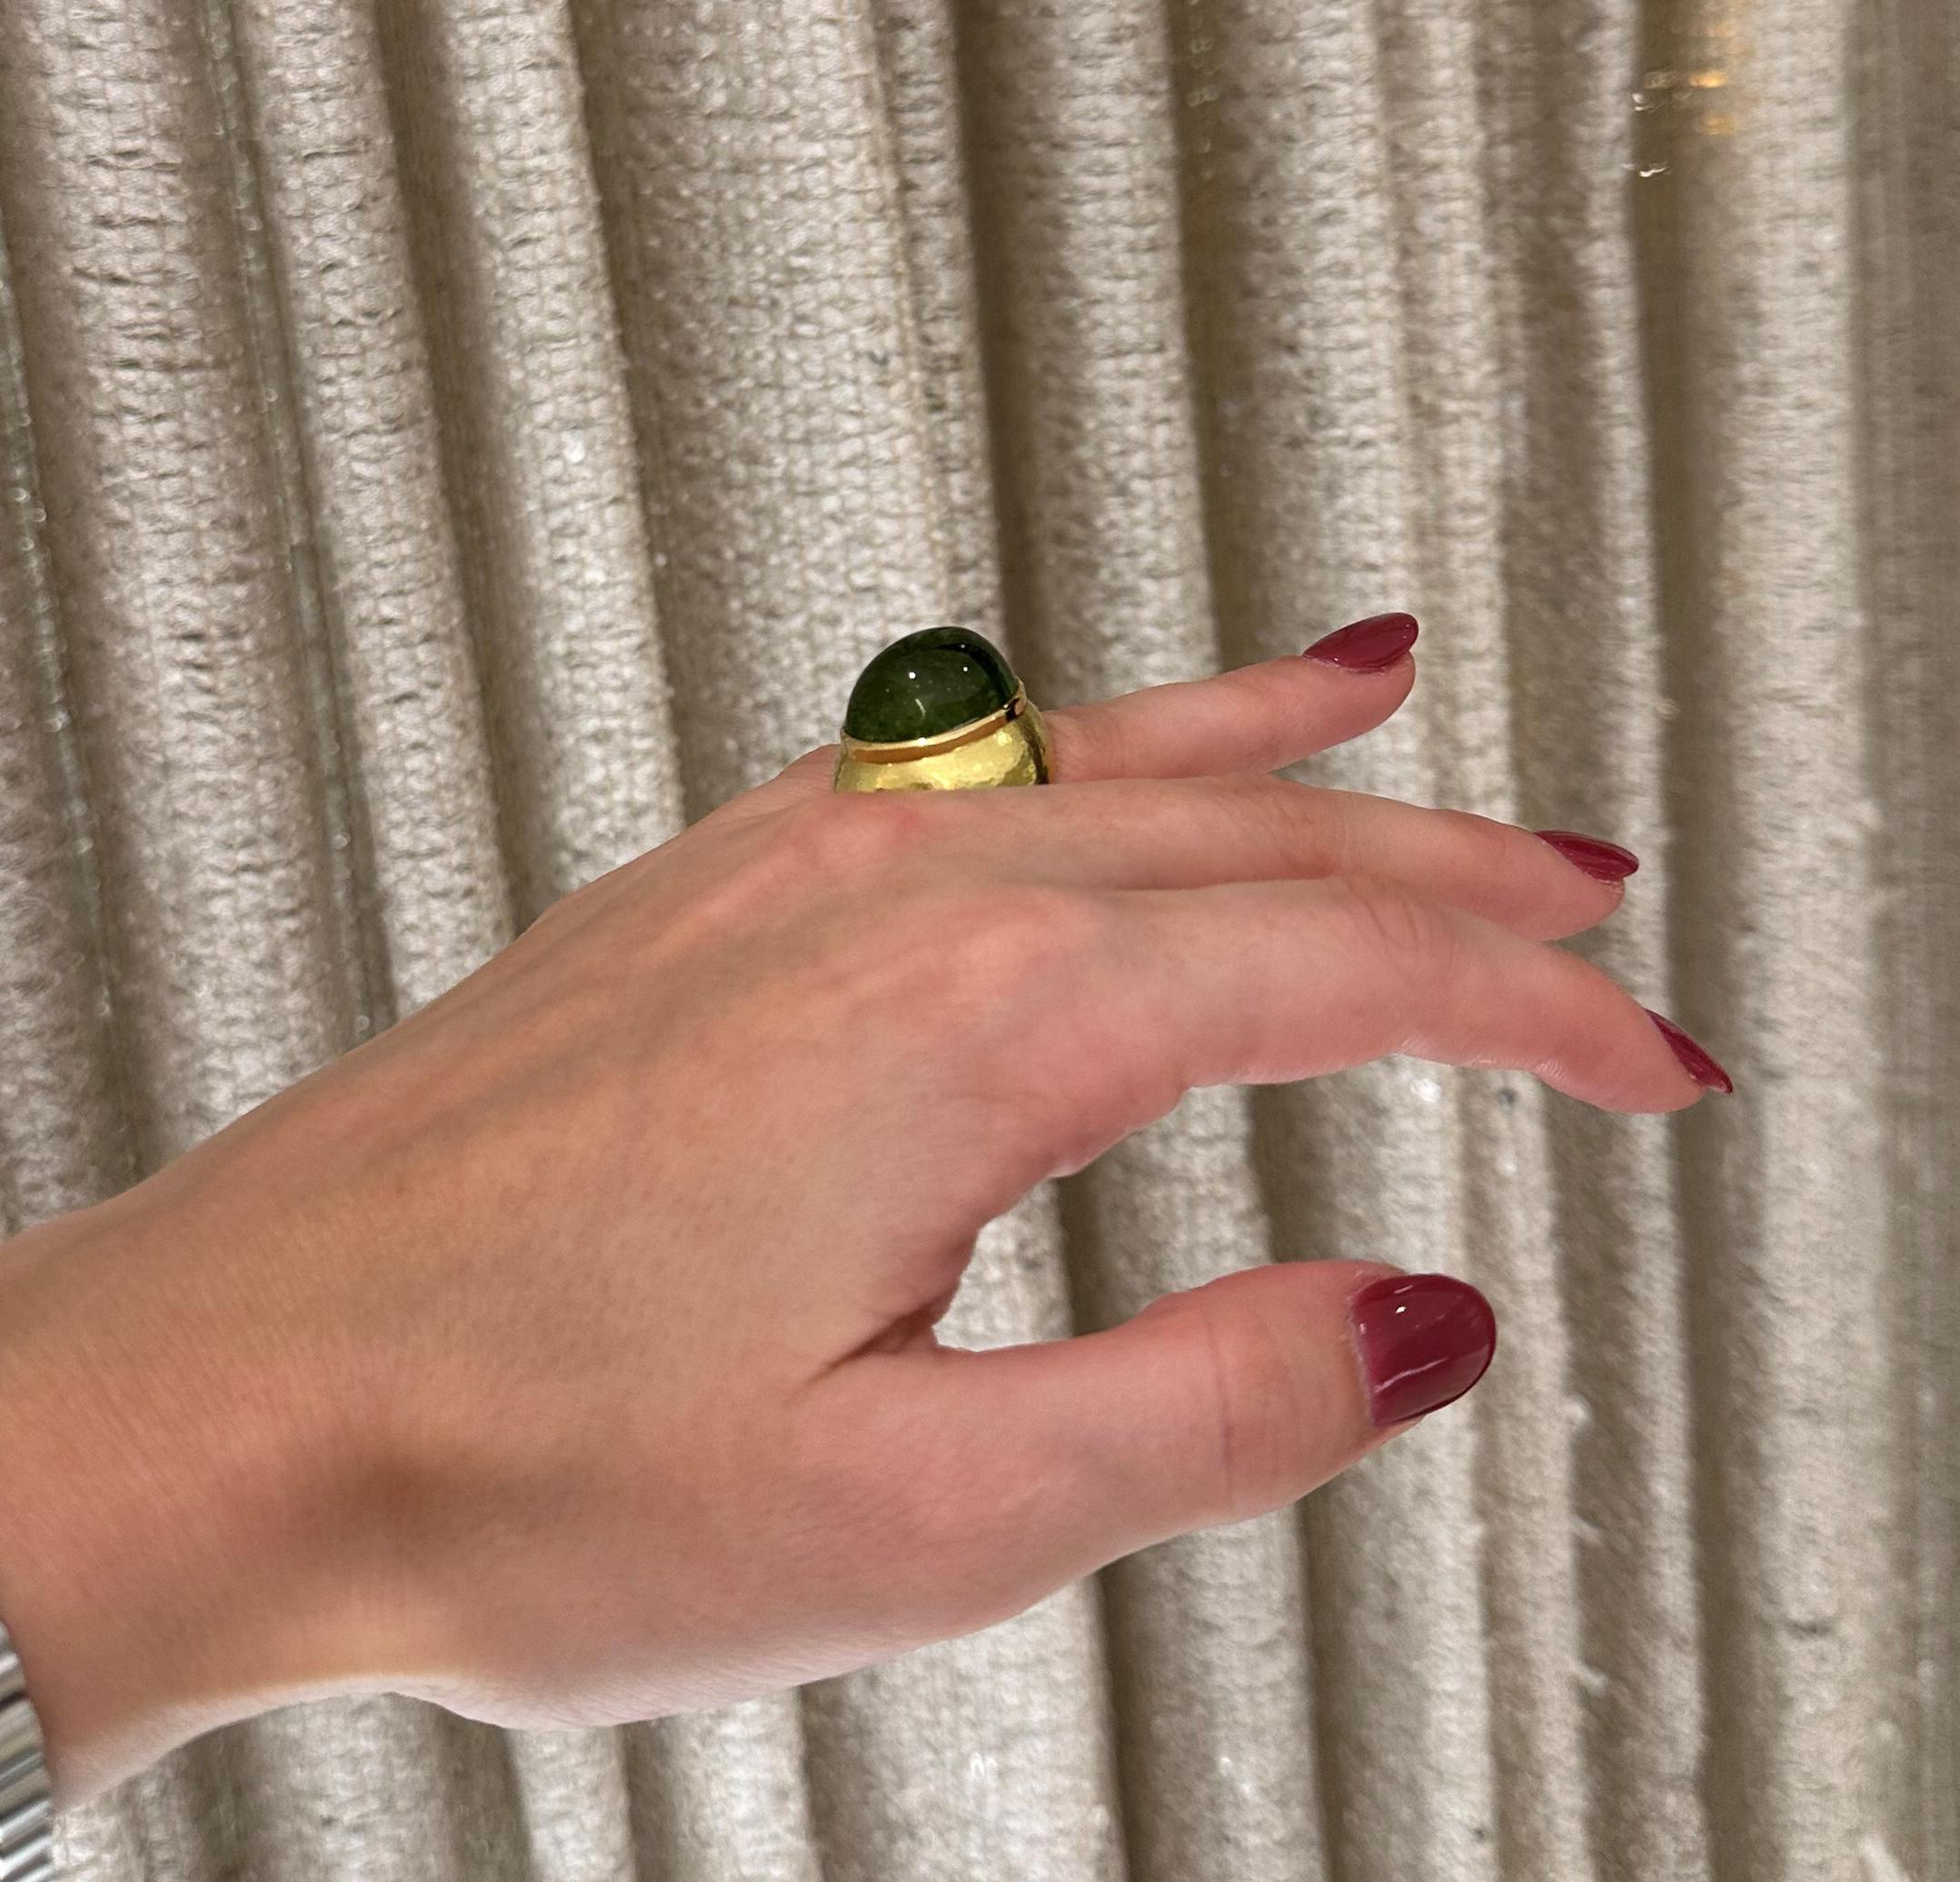 From the Eiseman Estate Jewelry Collection, this circa 1980's 18 karat yellow gold ring by designer DeVroomen is set with an approximately 16.5 carat green tourmaline cabochon. The ring has a hammered finish and measures 24.73mm wide along the top